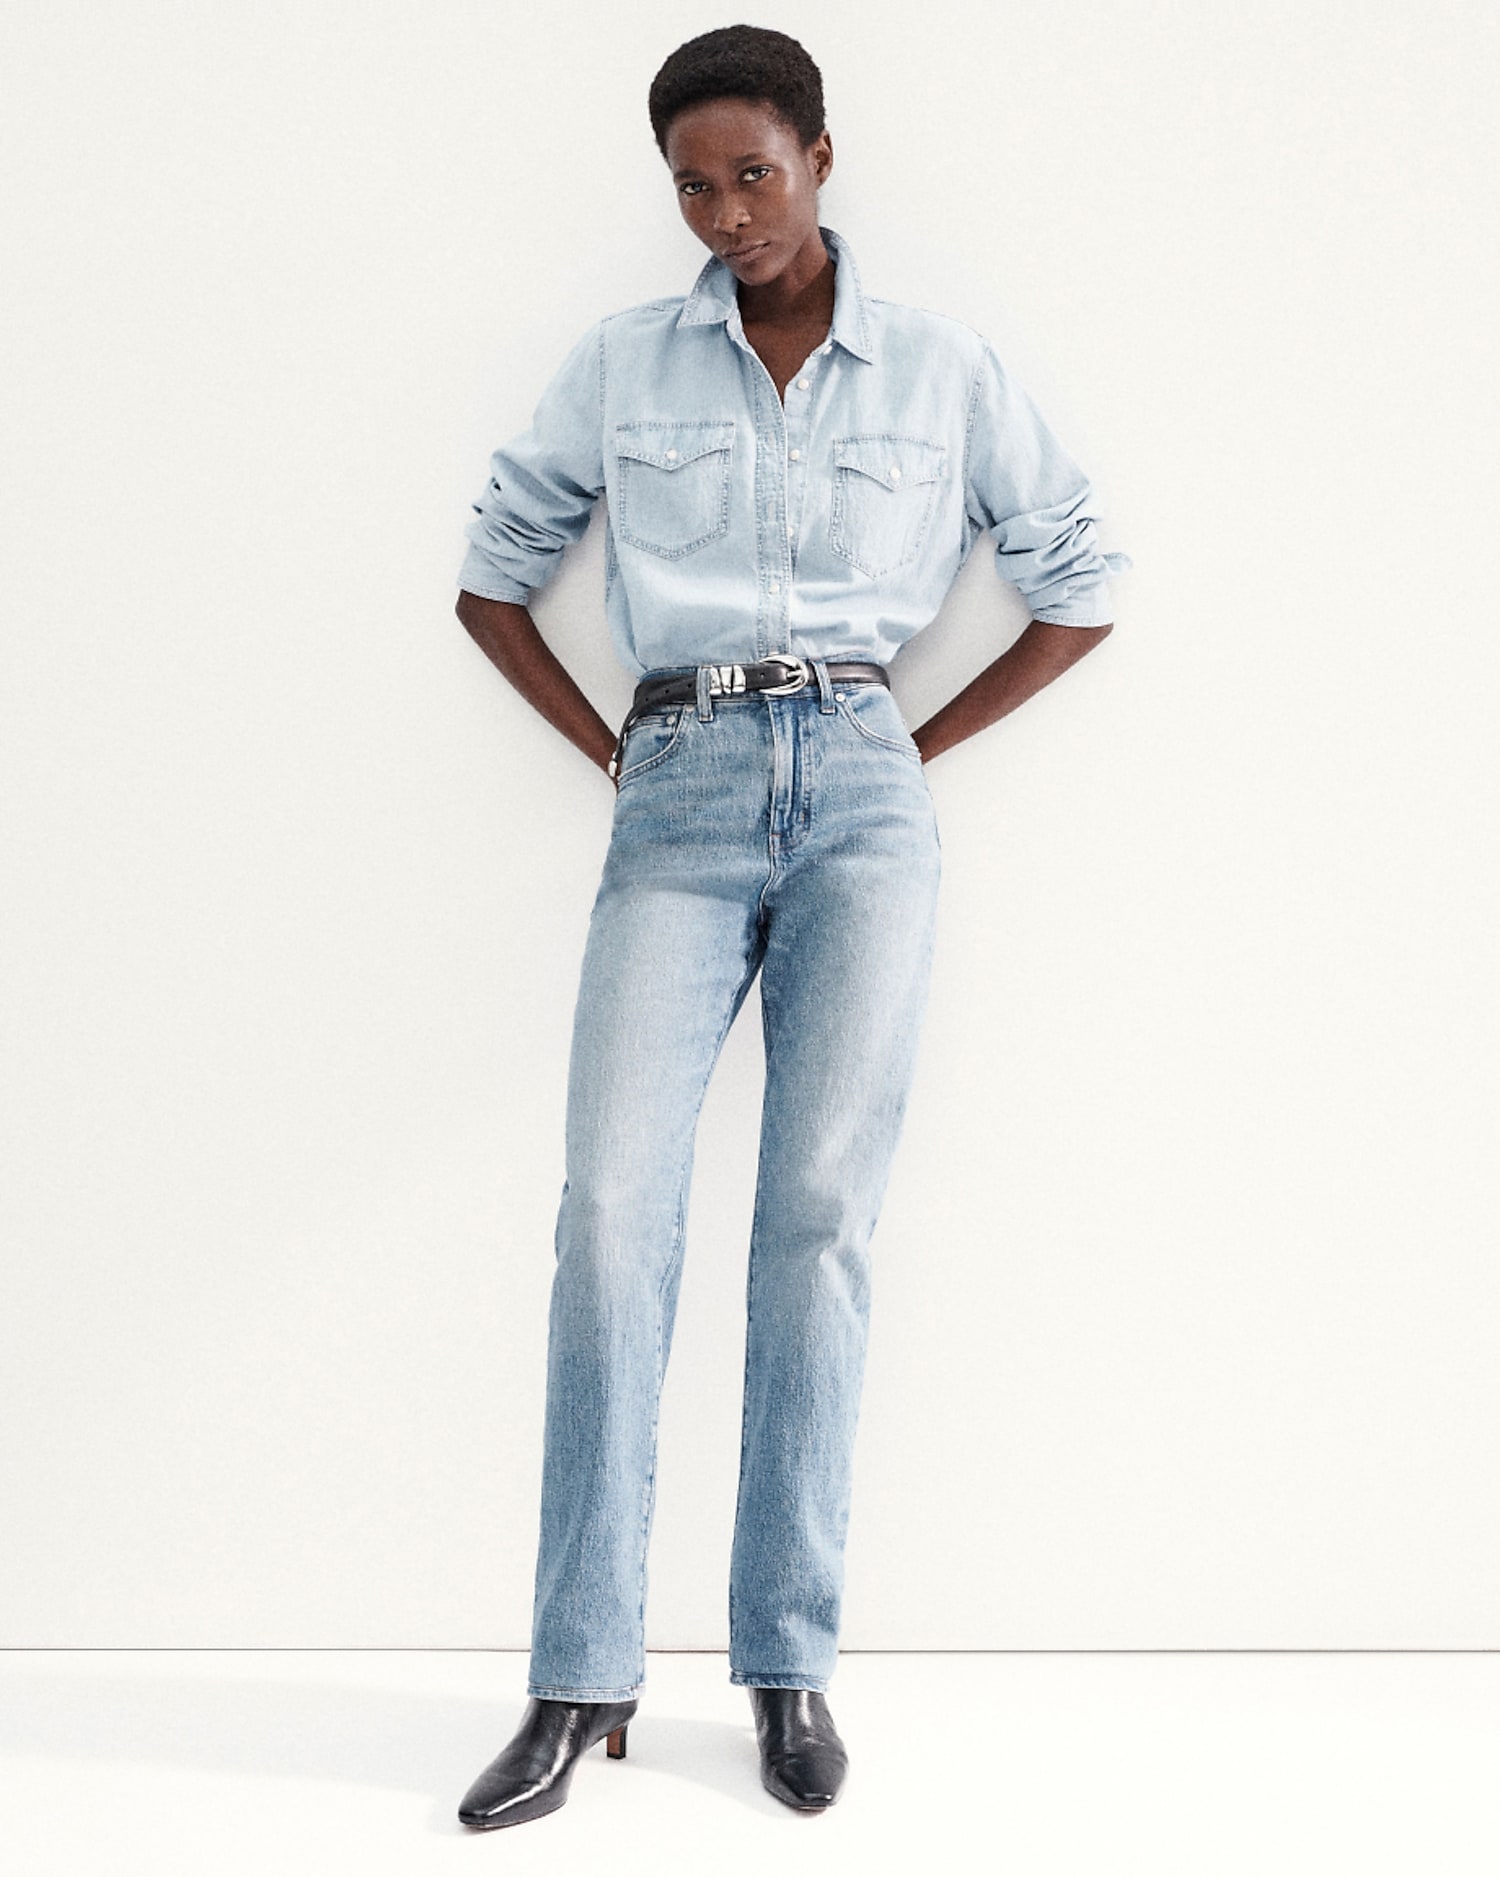 Shop 10 Denim Styles Starting at $30 From Madewell